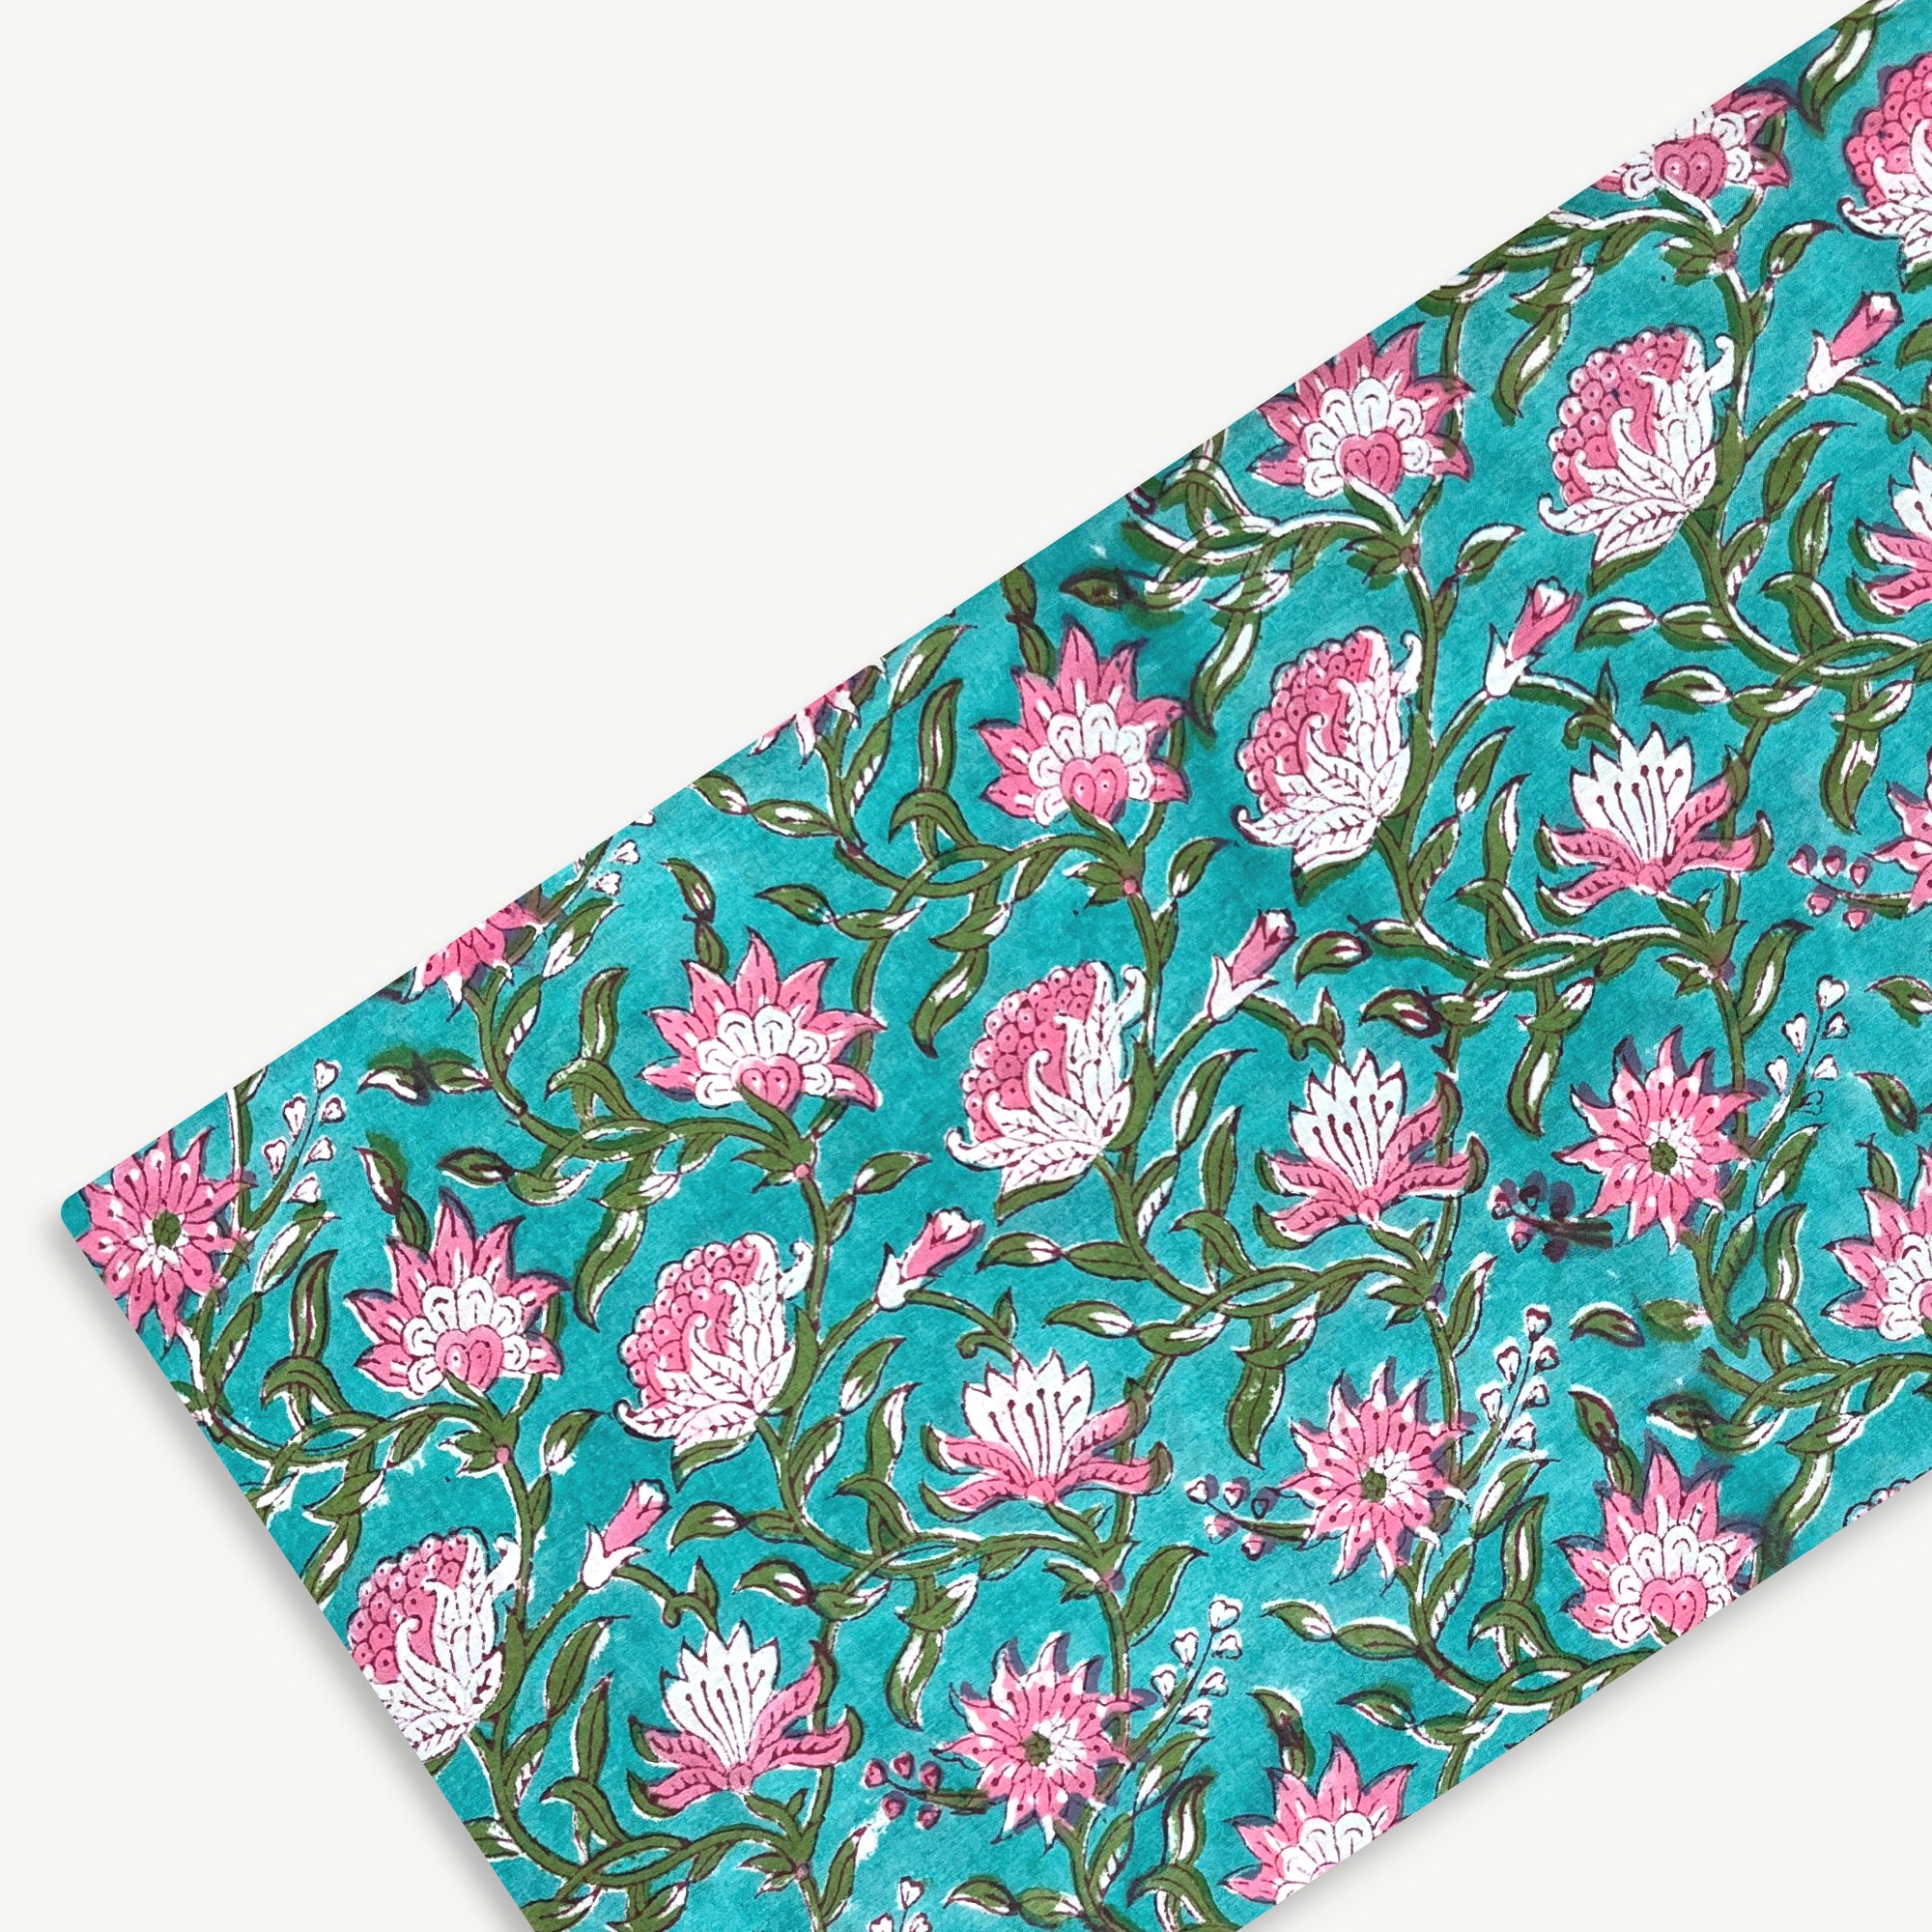 Pink Floral Jaal Rapid Hand Block Printed Cotton Fabric